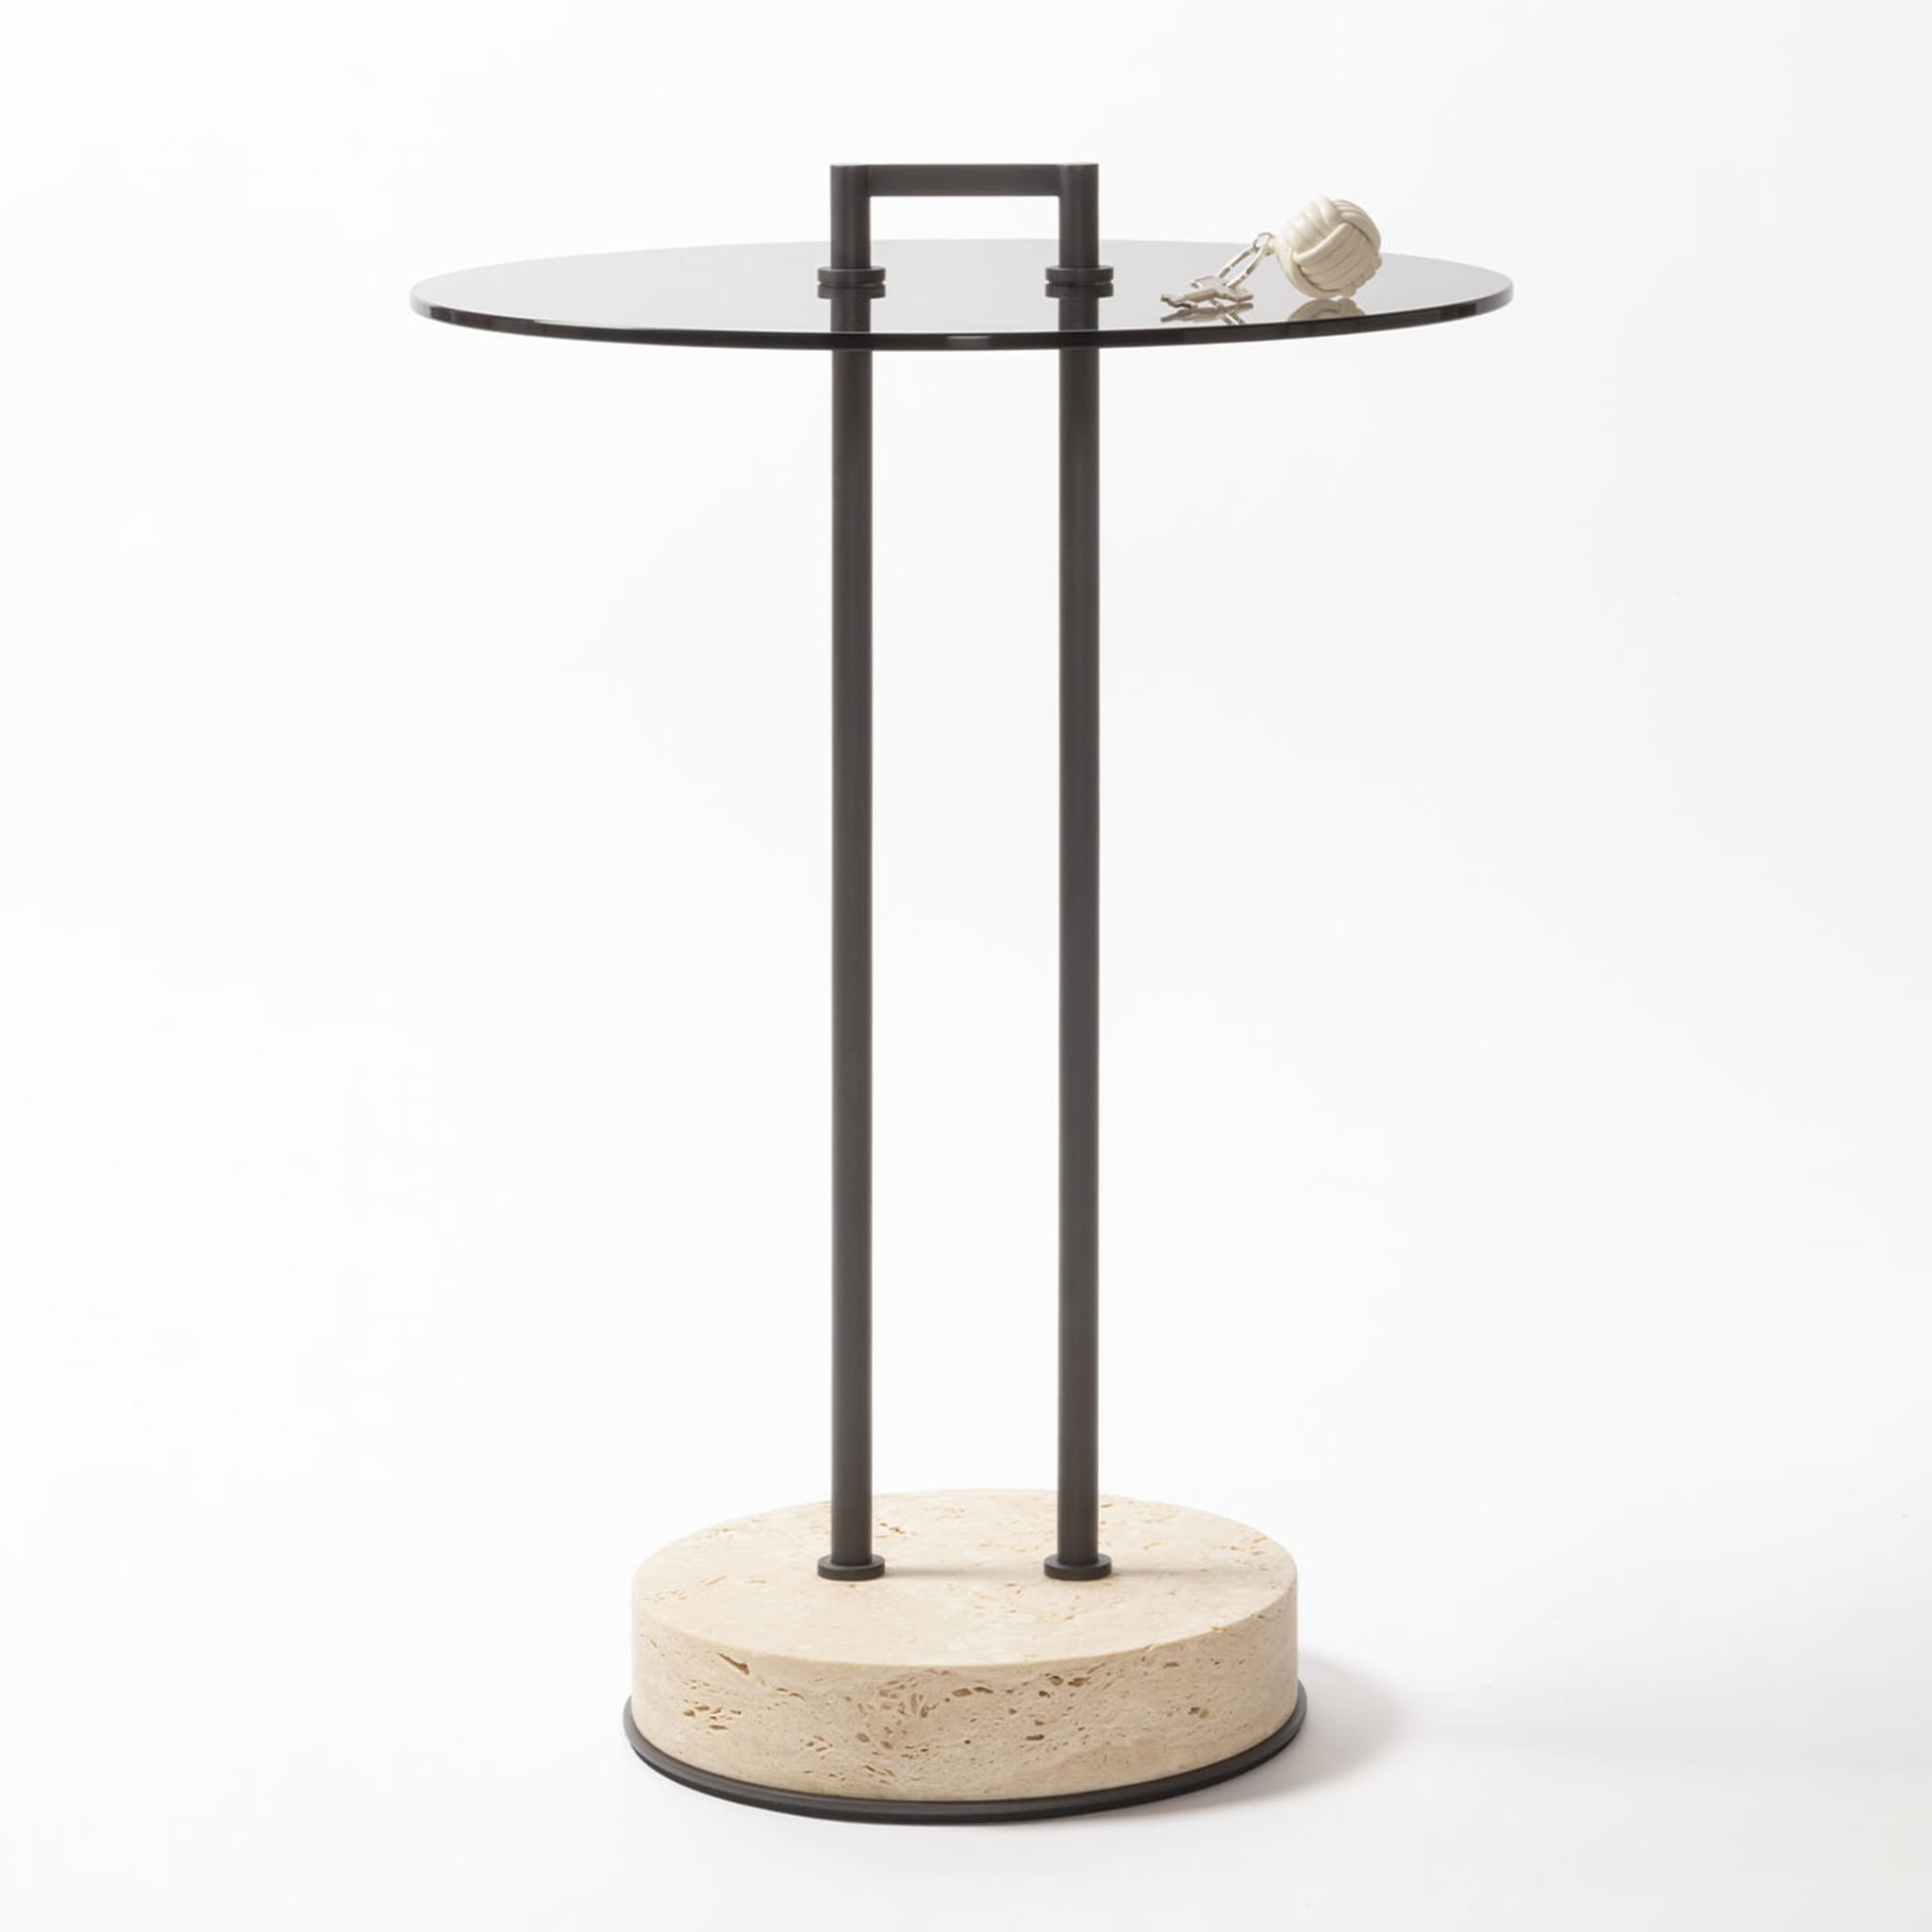 Urbino Marble Occasional Table #2 - Alternative view 1